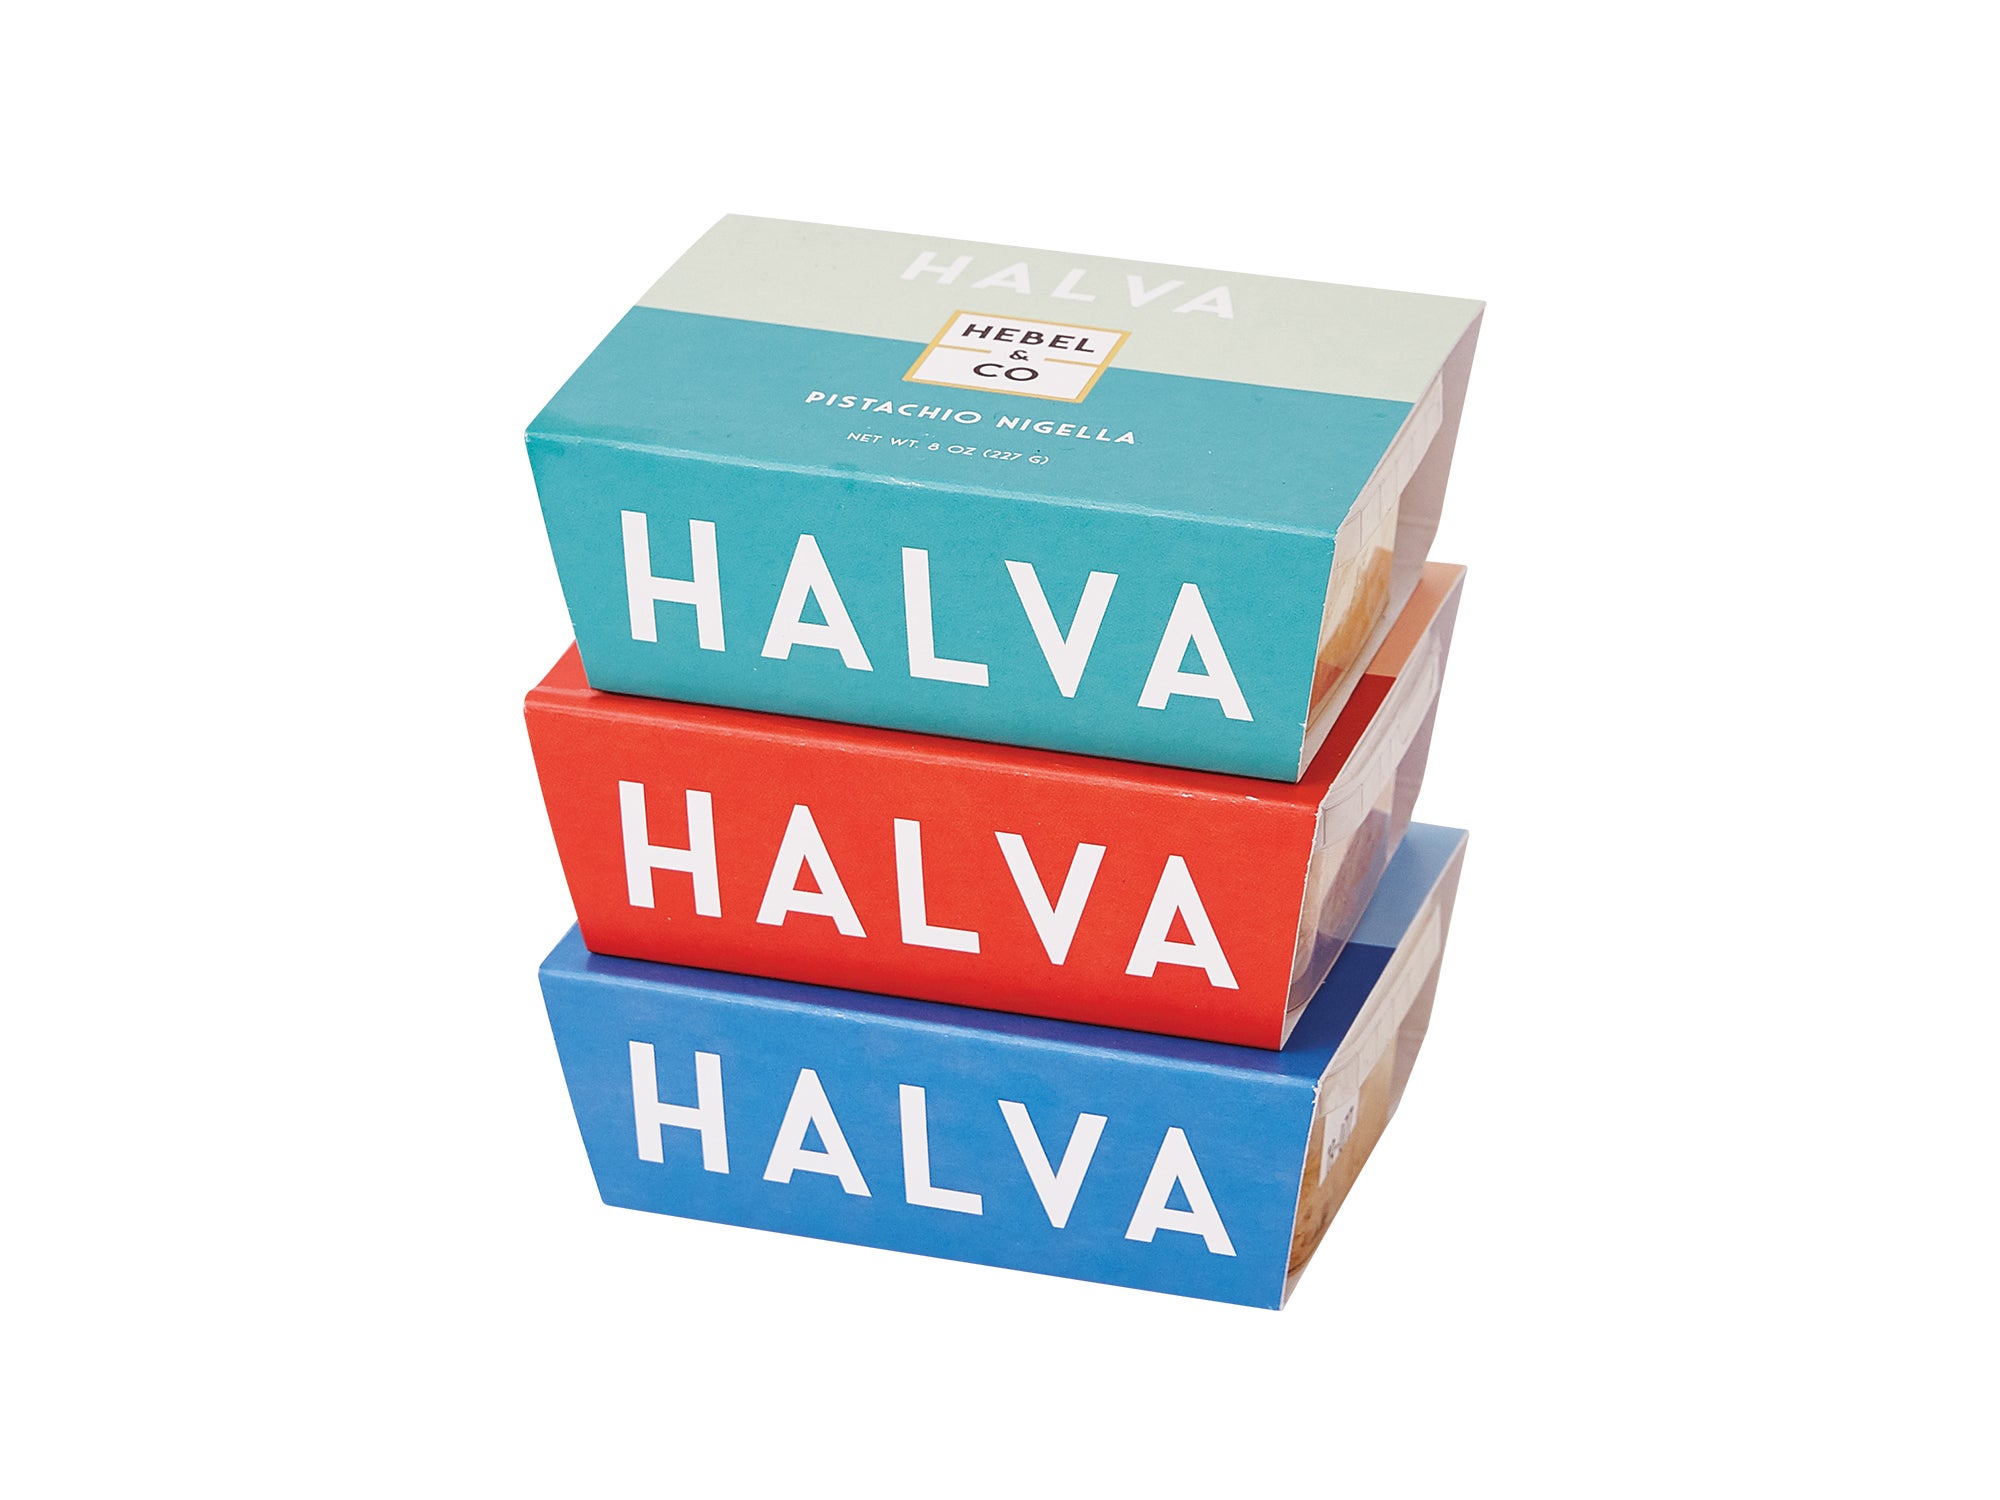 Your Birthright Packing Guide Includes the Cutest Halva You’ve Ever Seen